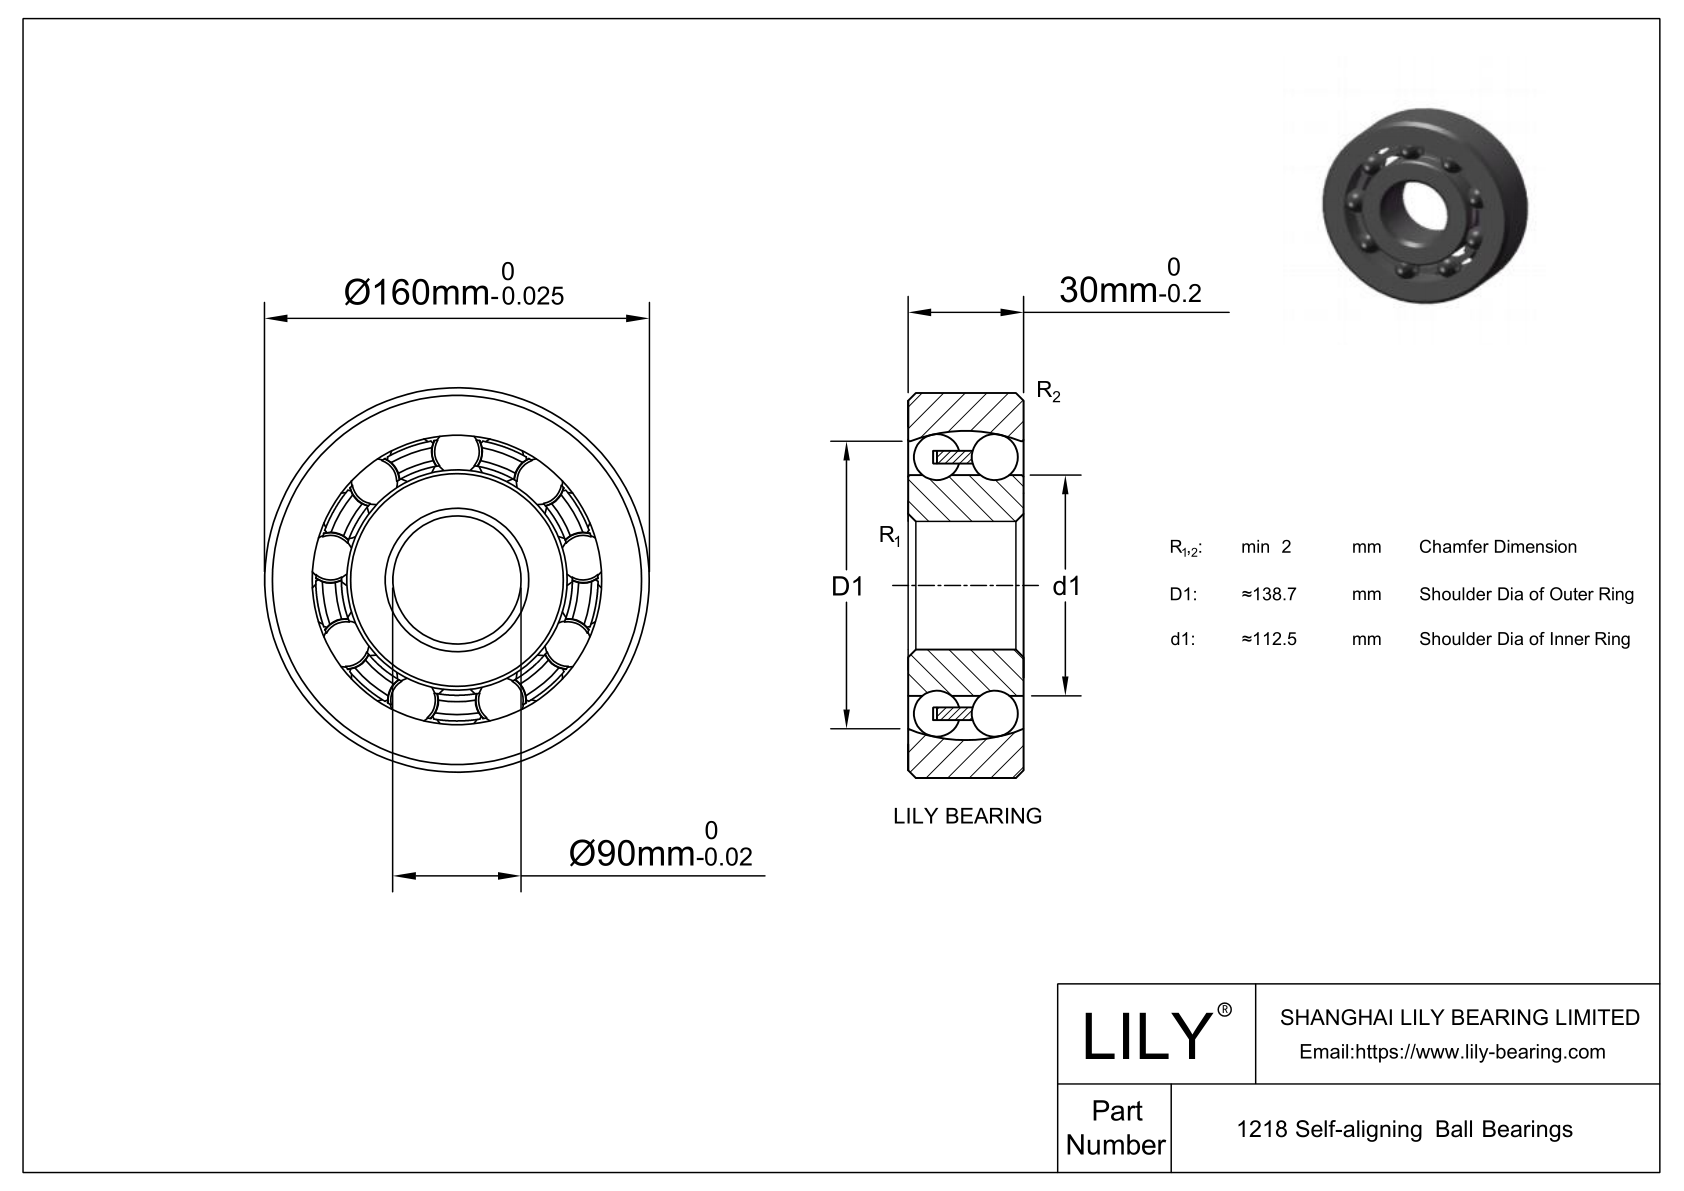 S1218 Stainless Steel Self Aligning Ball Bearings cad drawing